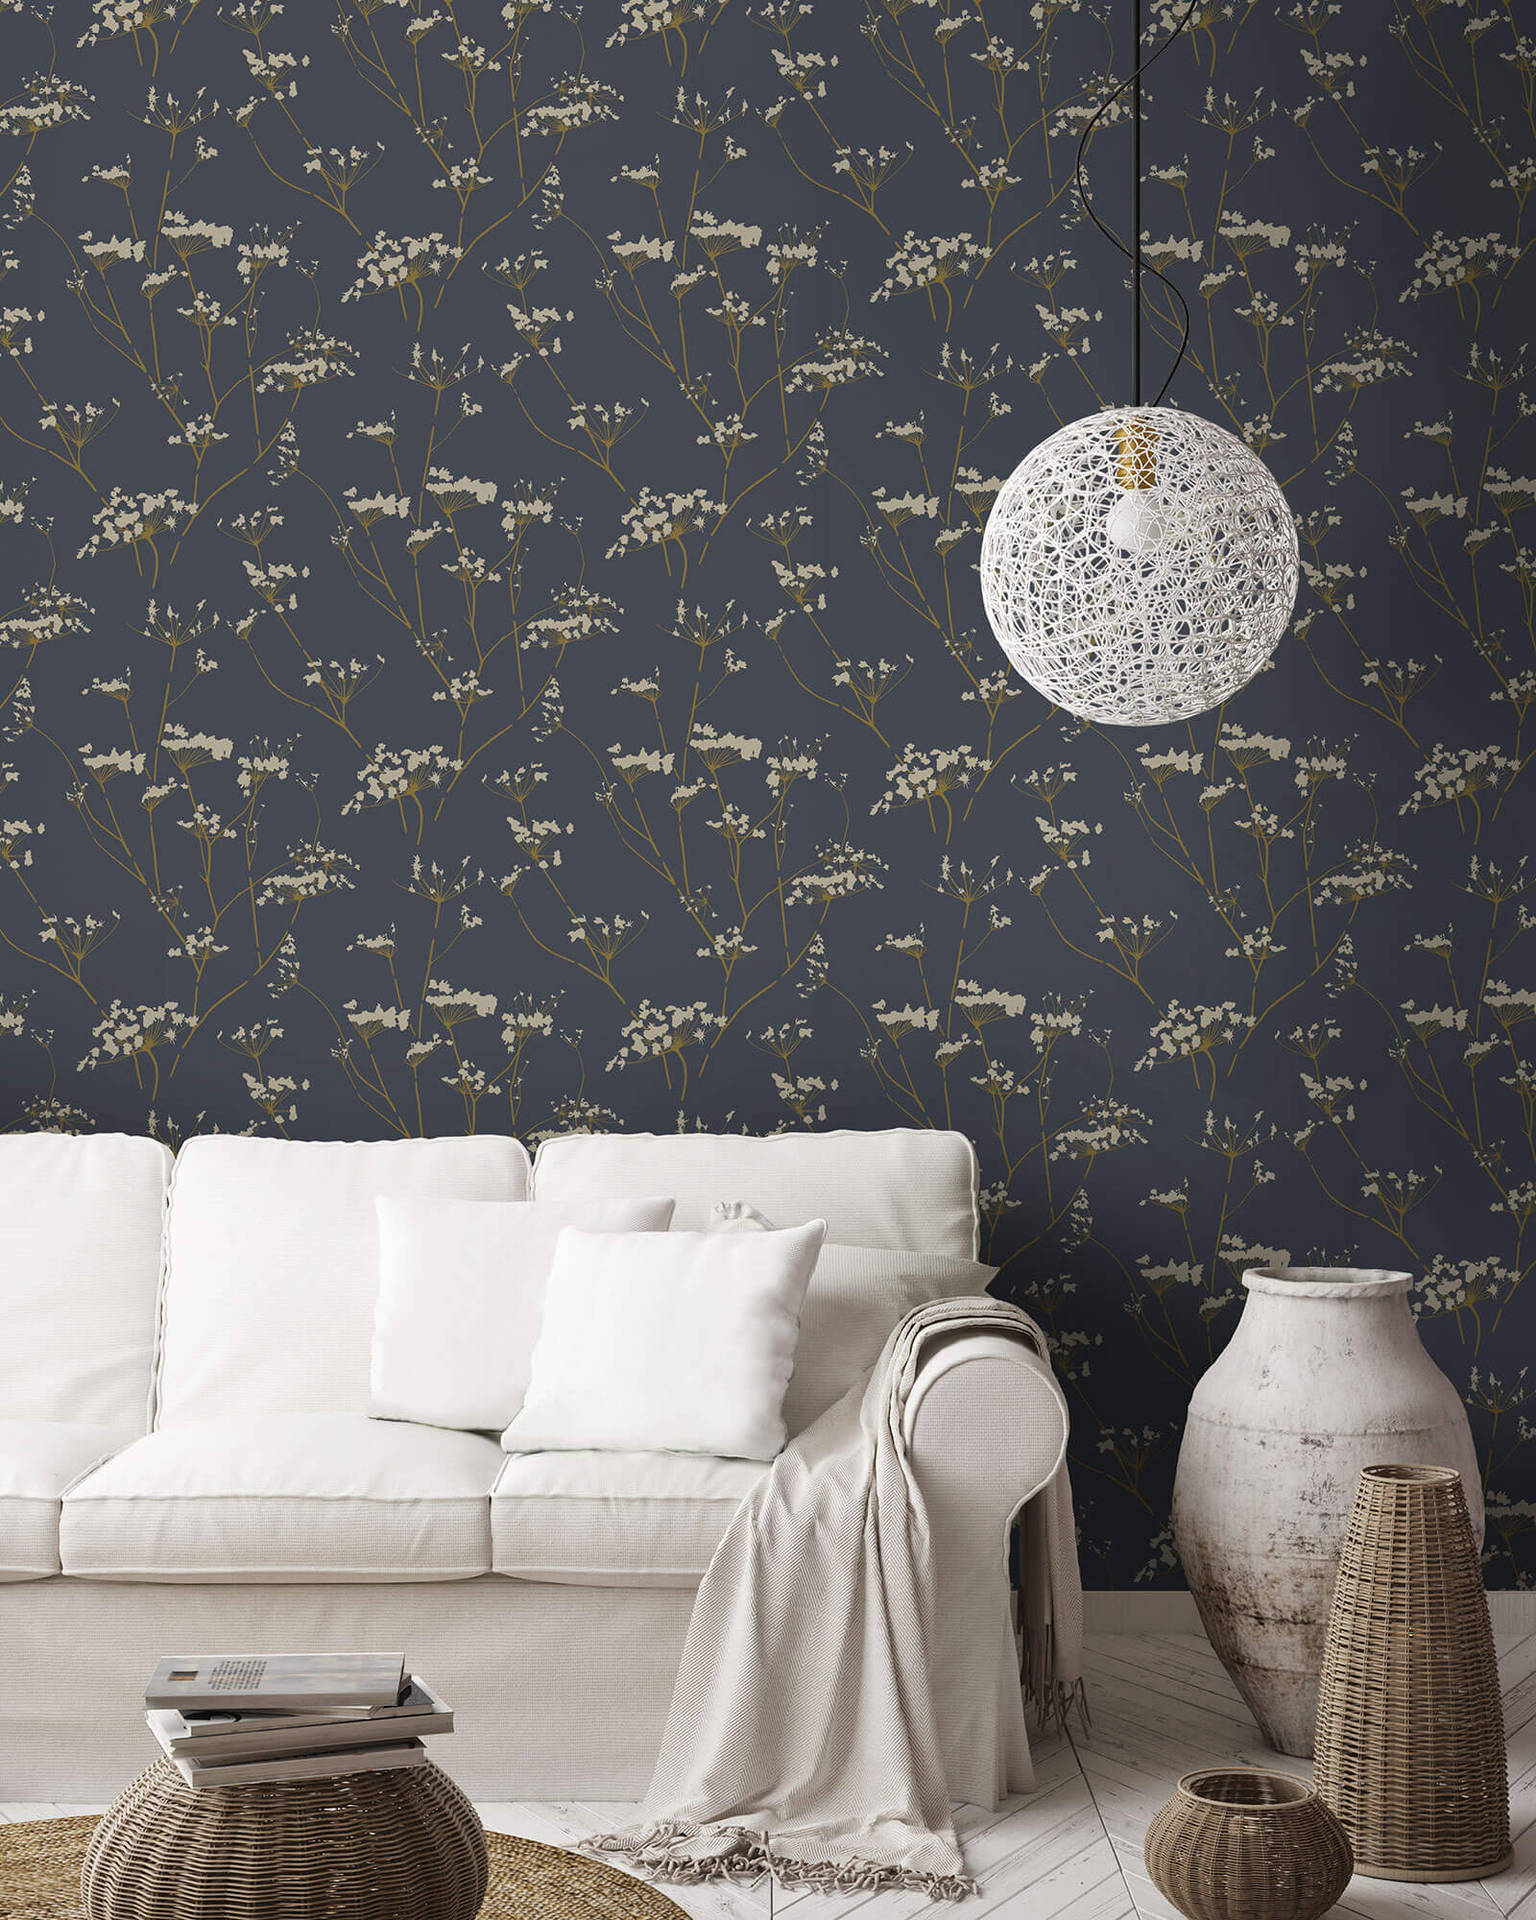 Living Room With Enchanted Forest Wall Pattern Wallpaper